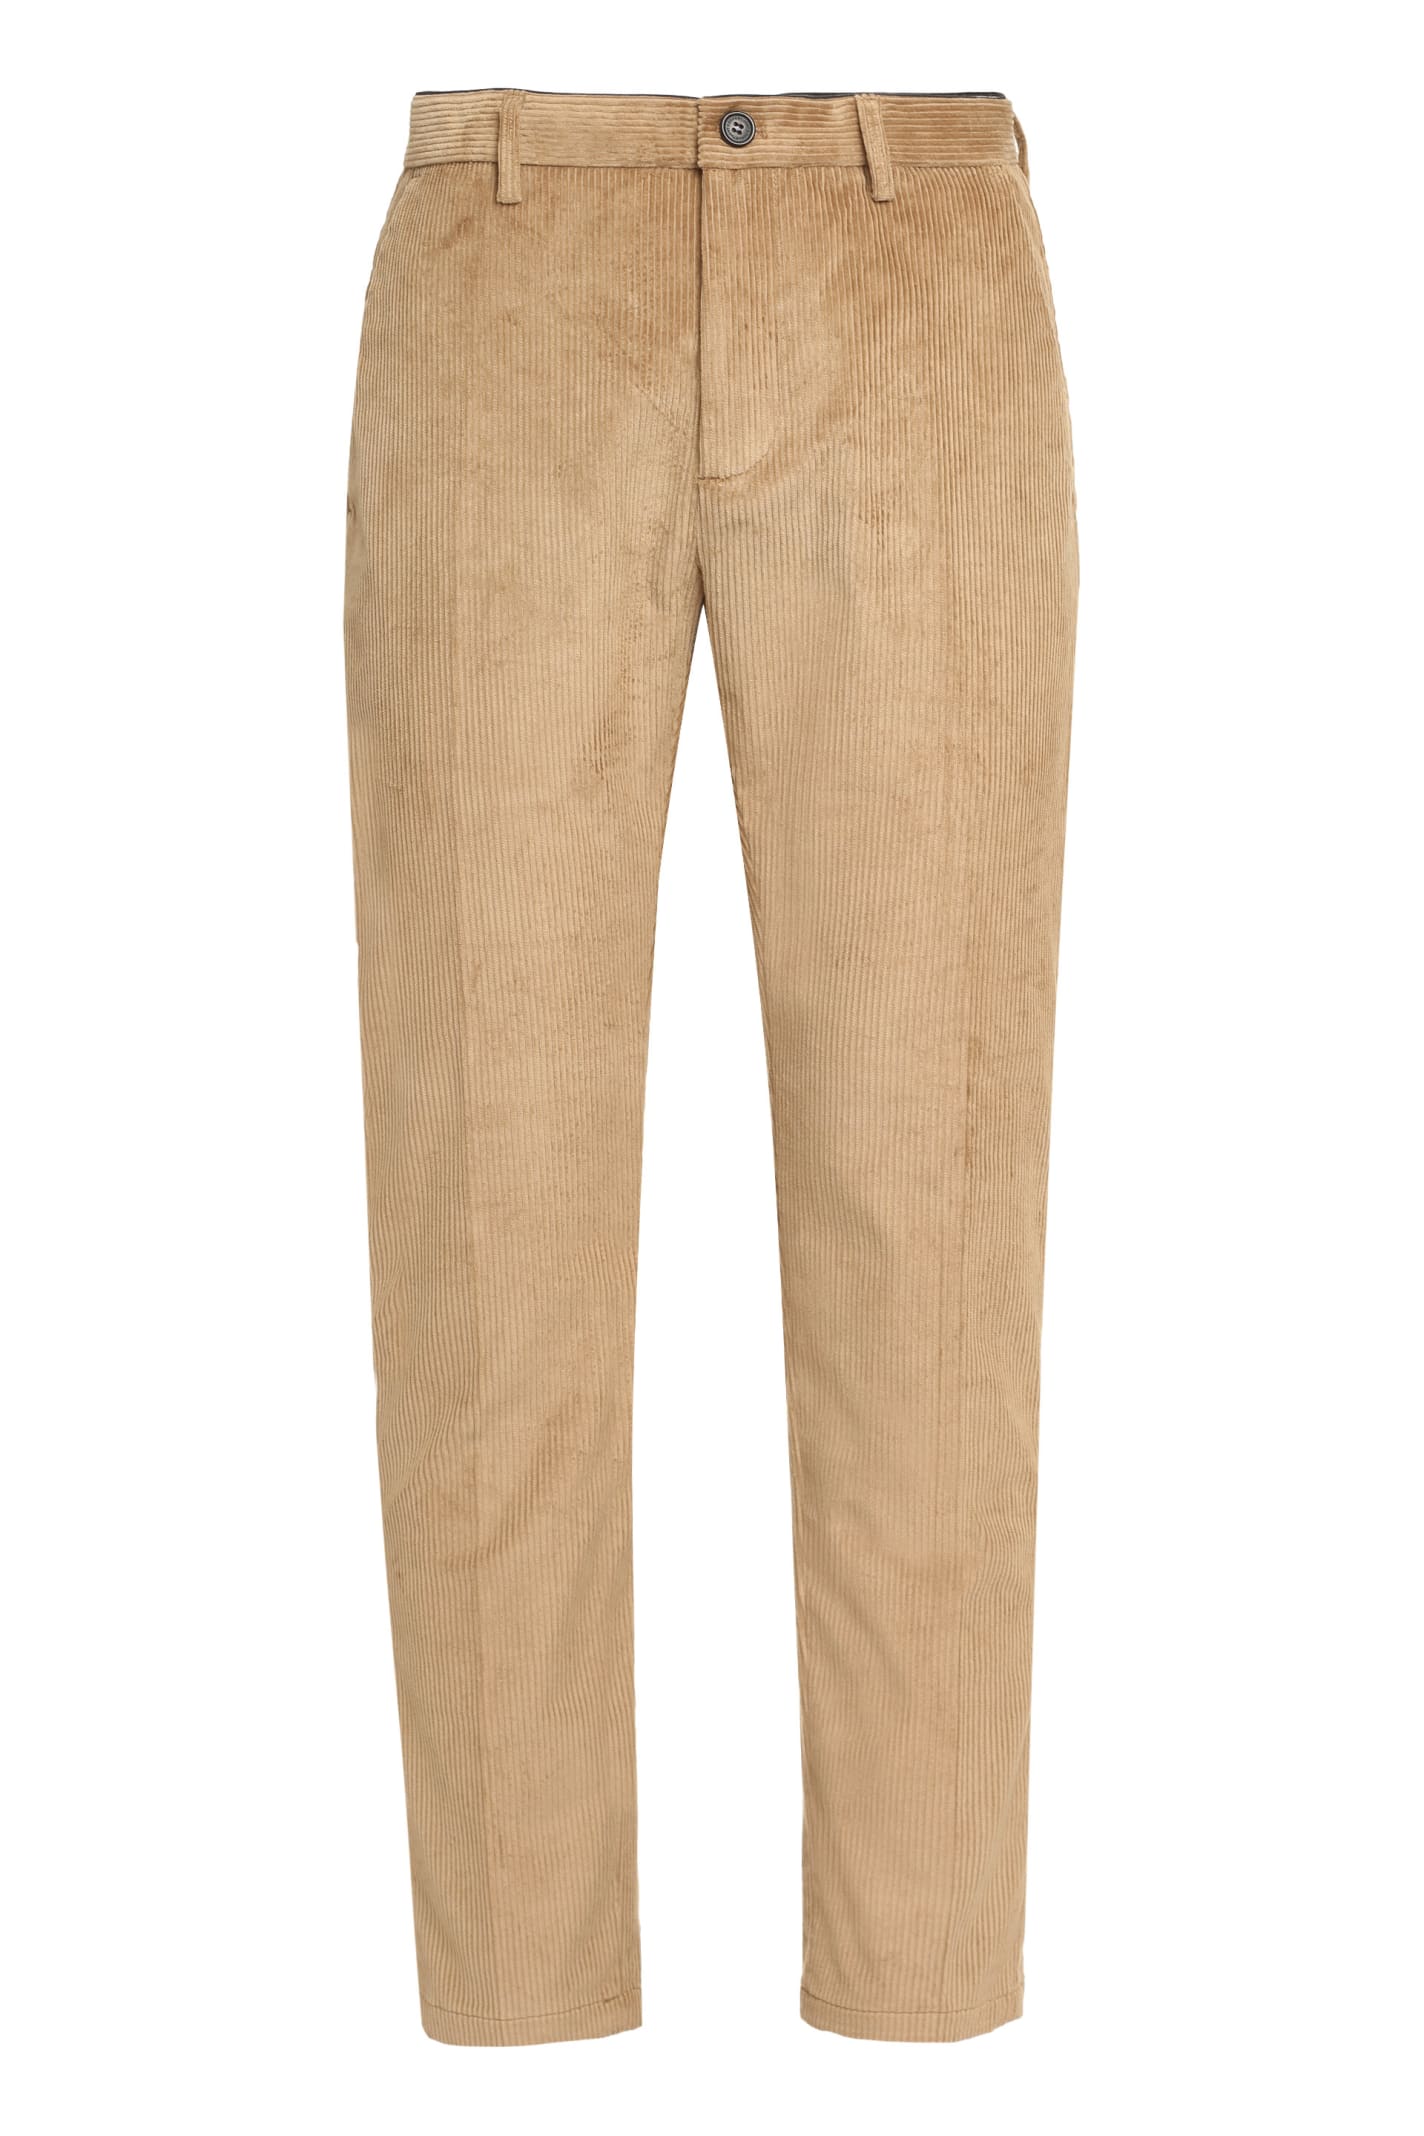 Department Five Prince Corduroy Chino-pants In Camel